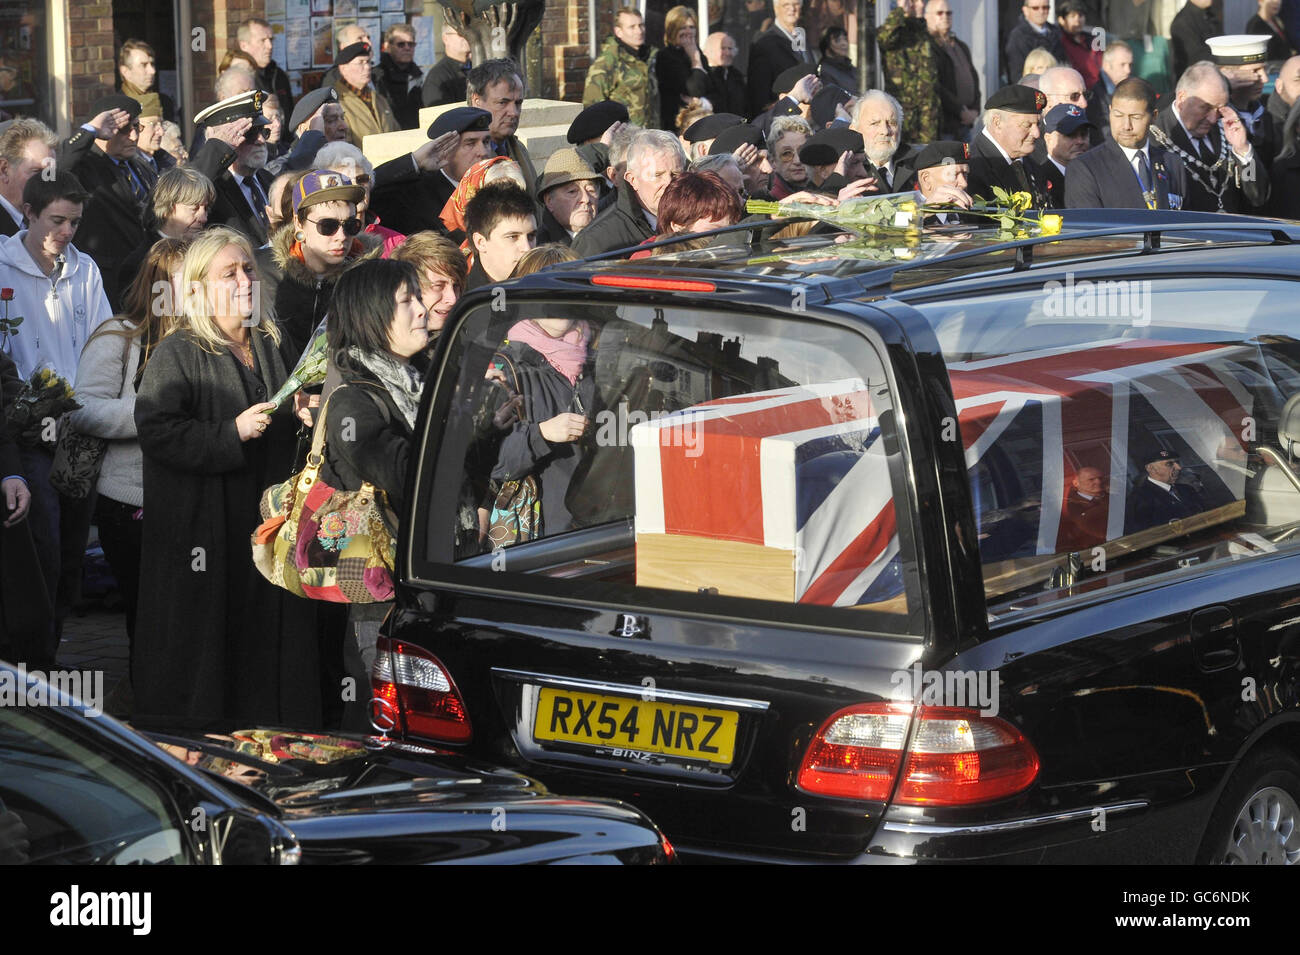 Mourners weep at a repatriation through the Wiltshire town of Wootton Bassett as the bodies of Rifleman Philip Allen, 20, of 2nd Battalion The Rifles and Samuel John Bassett, 20, of 4th Battalion The Rifles pass through the High Street. Stock Photo